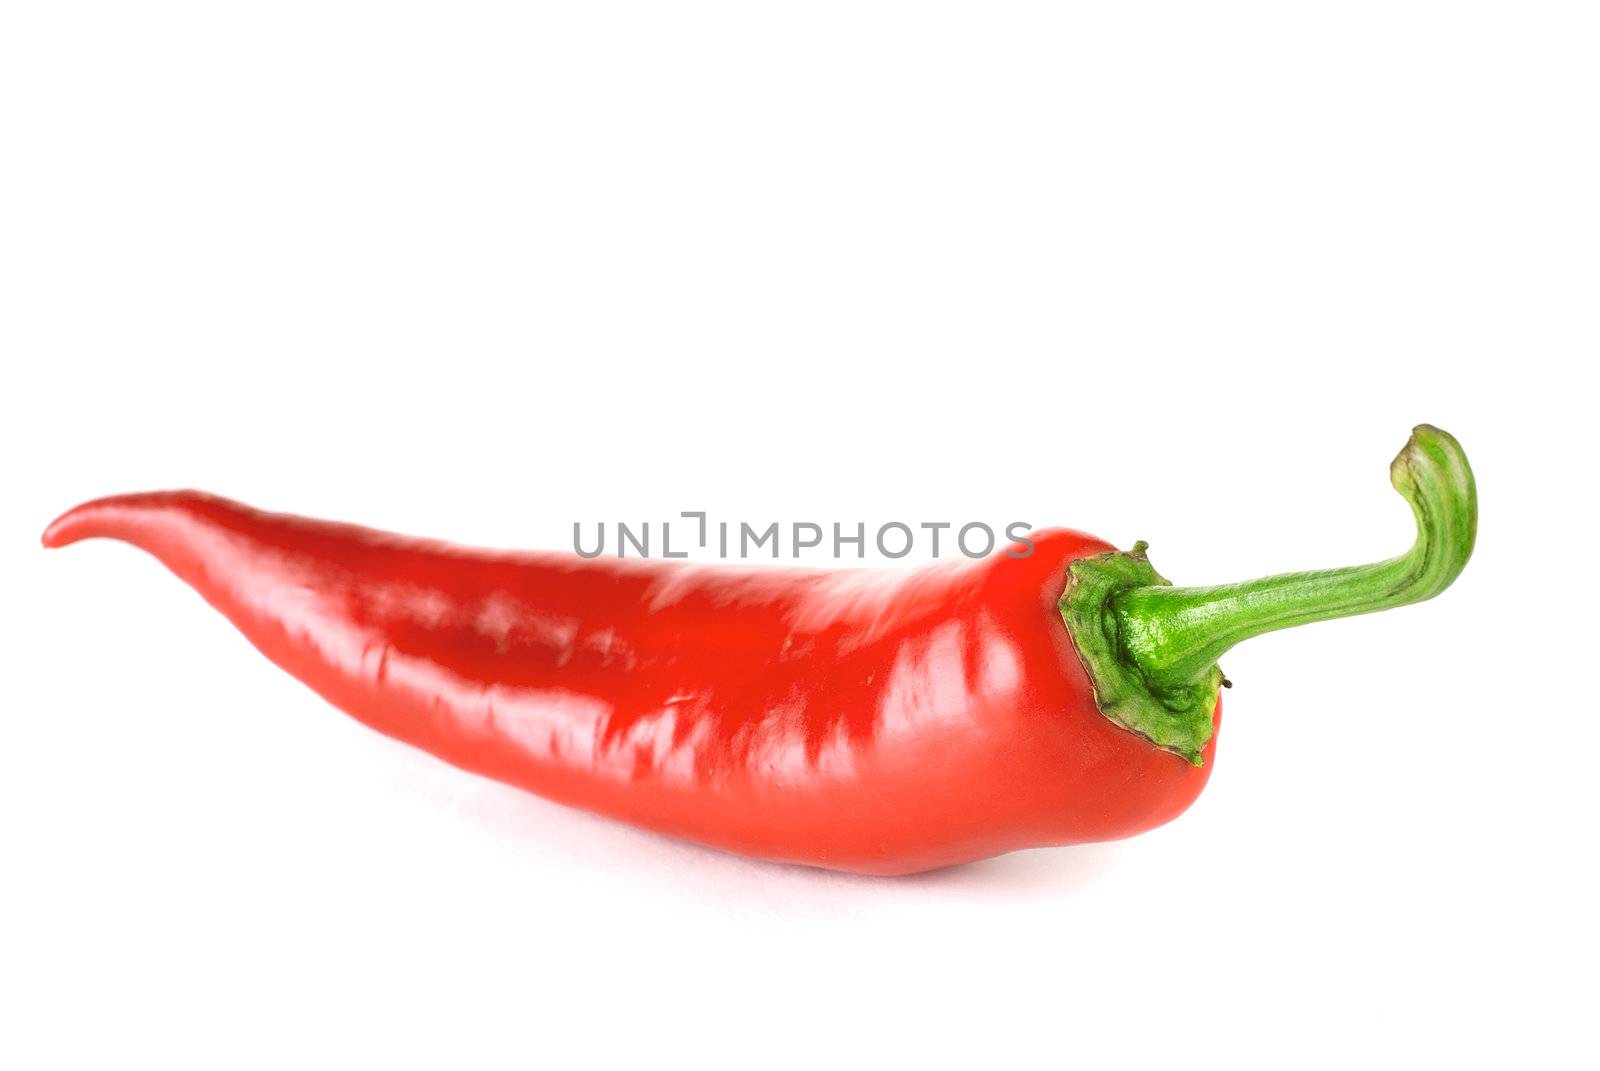 Red chili pepper isolated on a white background by GennadiyShel